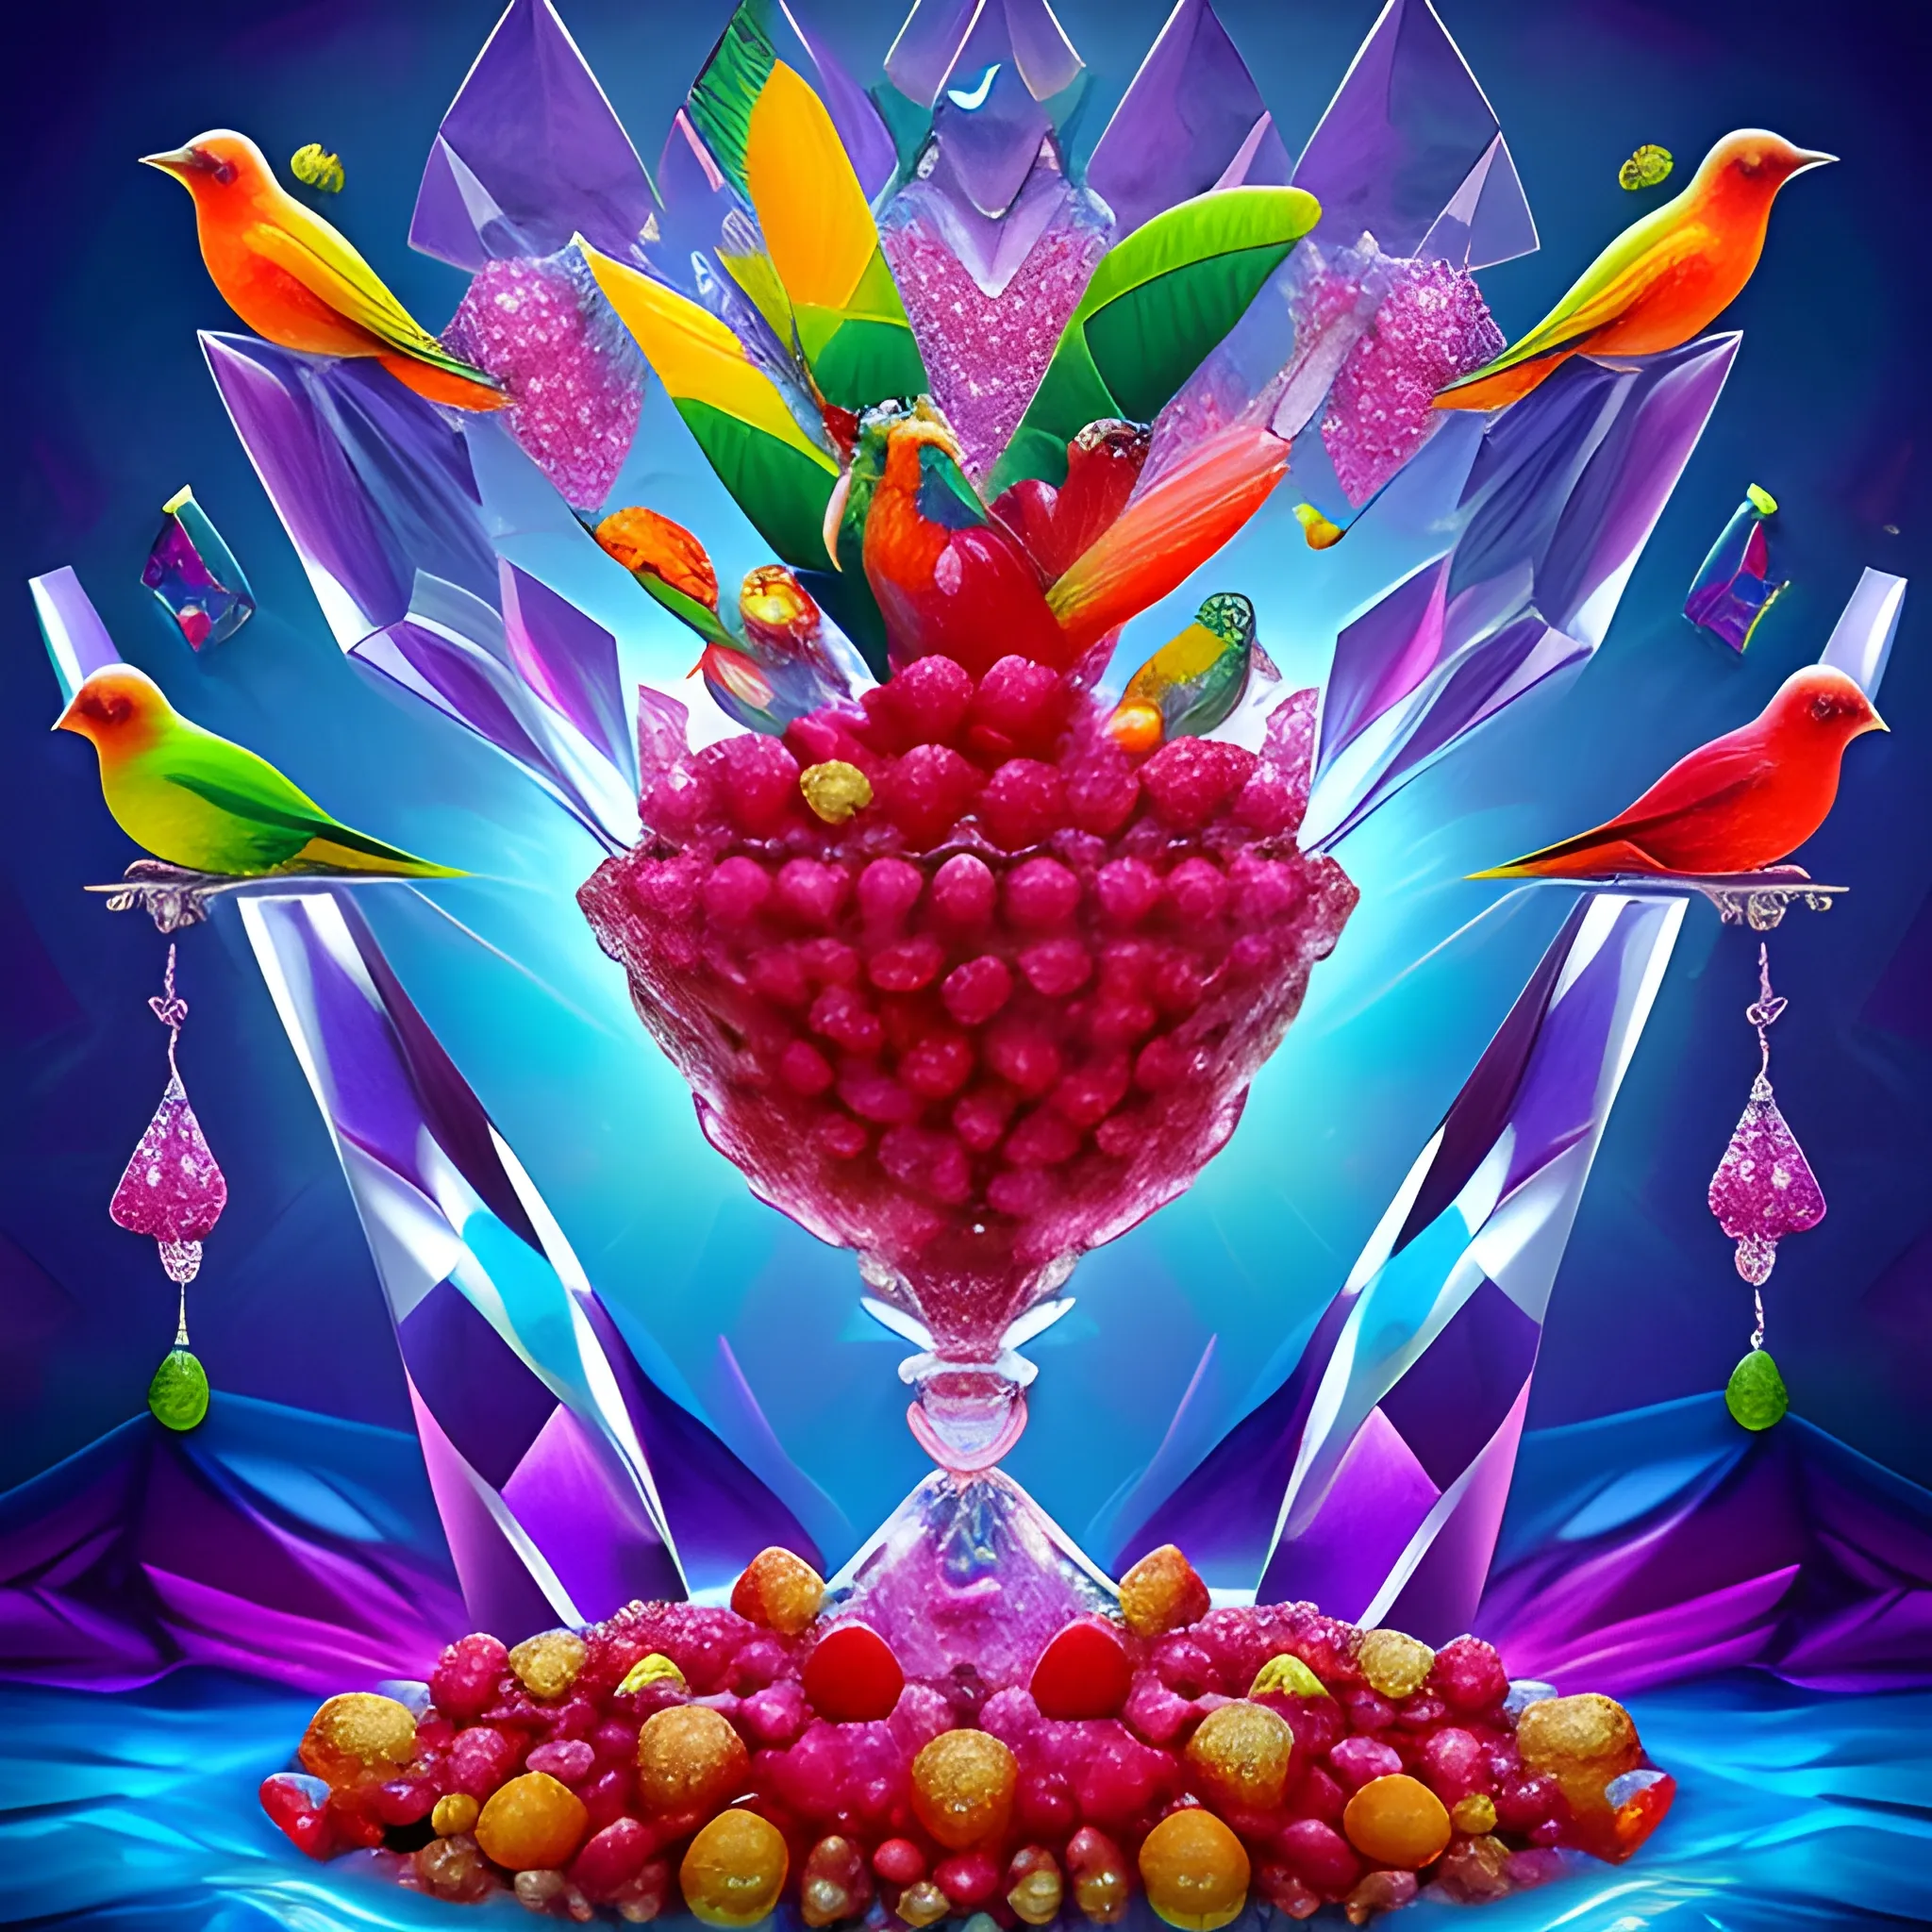 make a crystal sculpture of many crystal crazy raspberries with human face, crystal birds of paradise and  parrots around, many ice cubes  in the air, many plans of Amazon Rainforest, saturated colors, surrealism, chaotic background, 3D, Trippy,  eerie atmosphere, close up, Oil Painting, wide dynamic range, wide-angle view  